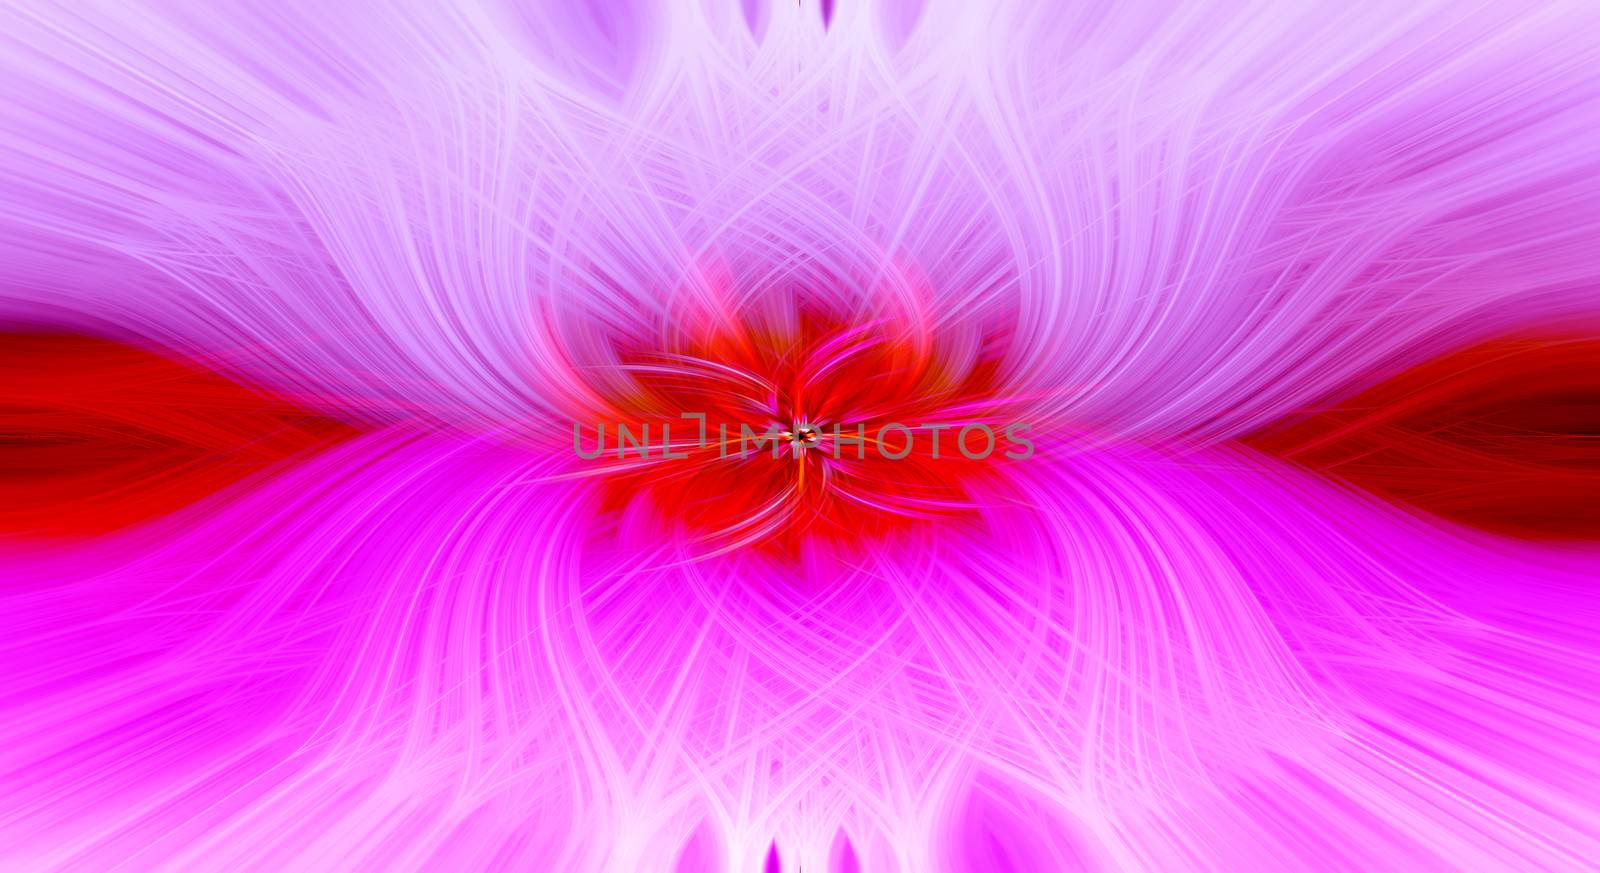 Beautiful abstract intertwined symmetrical 3d fibers forming a shape of sparkle, flame, flower, interlinked hearts. Pink, red, maroon, and purple colors. Illustration.